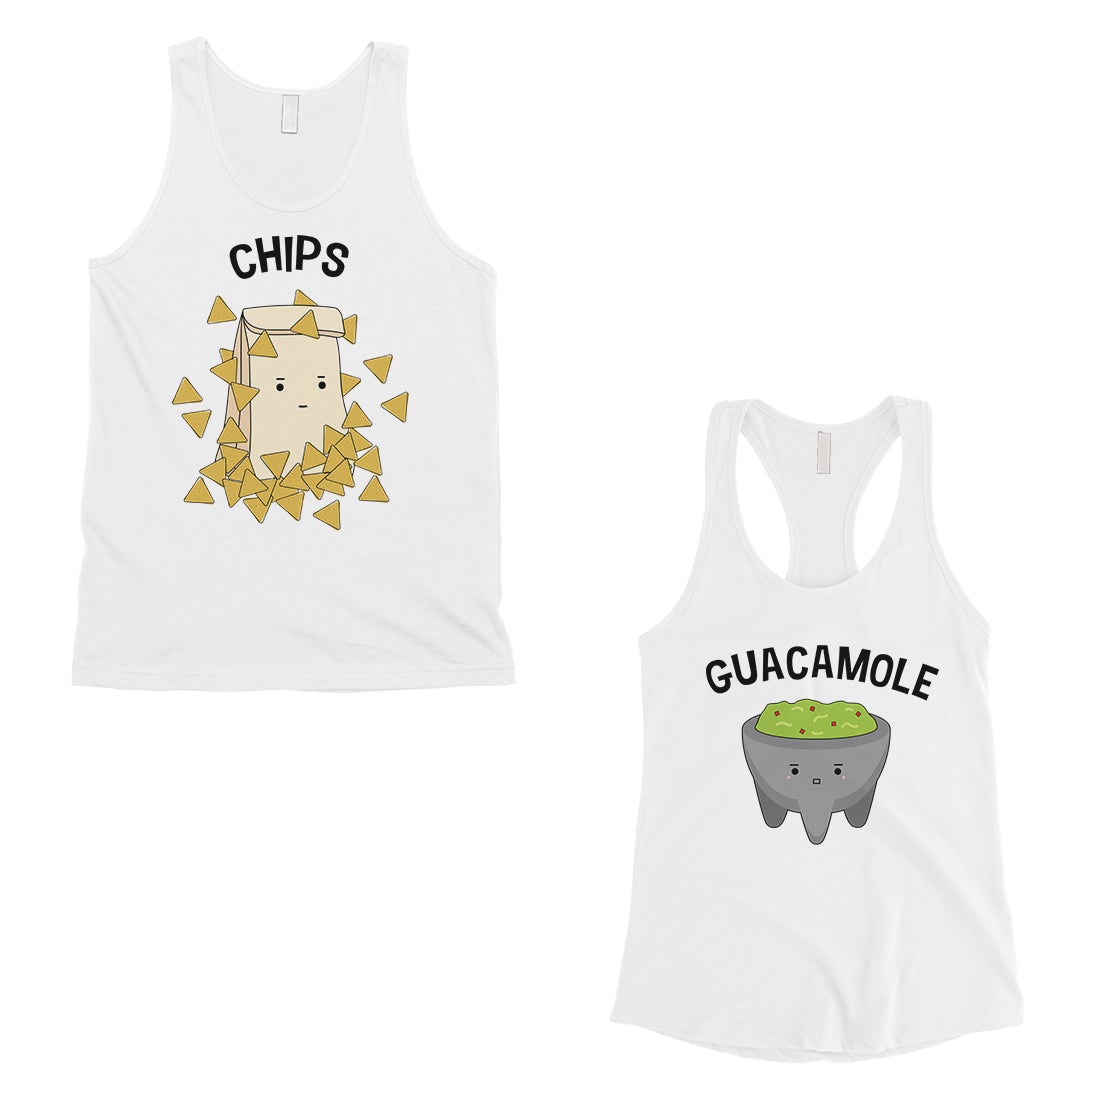 Chips & Guacamole Matching Couple Tank Tops Funny Wedding Gift White